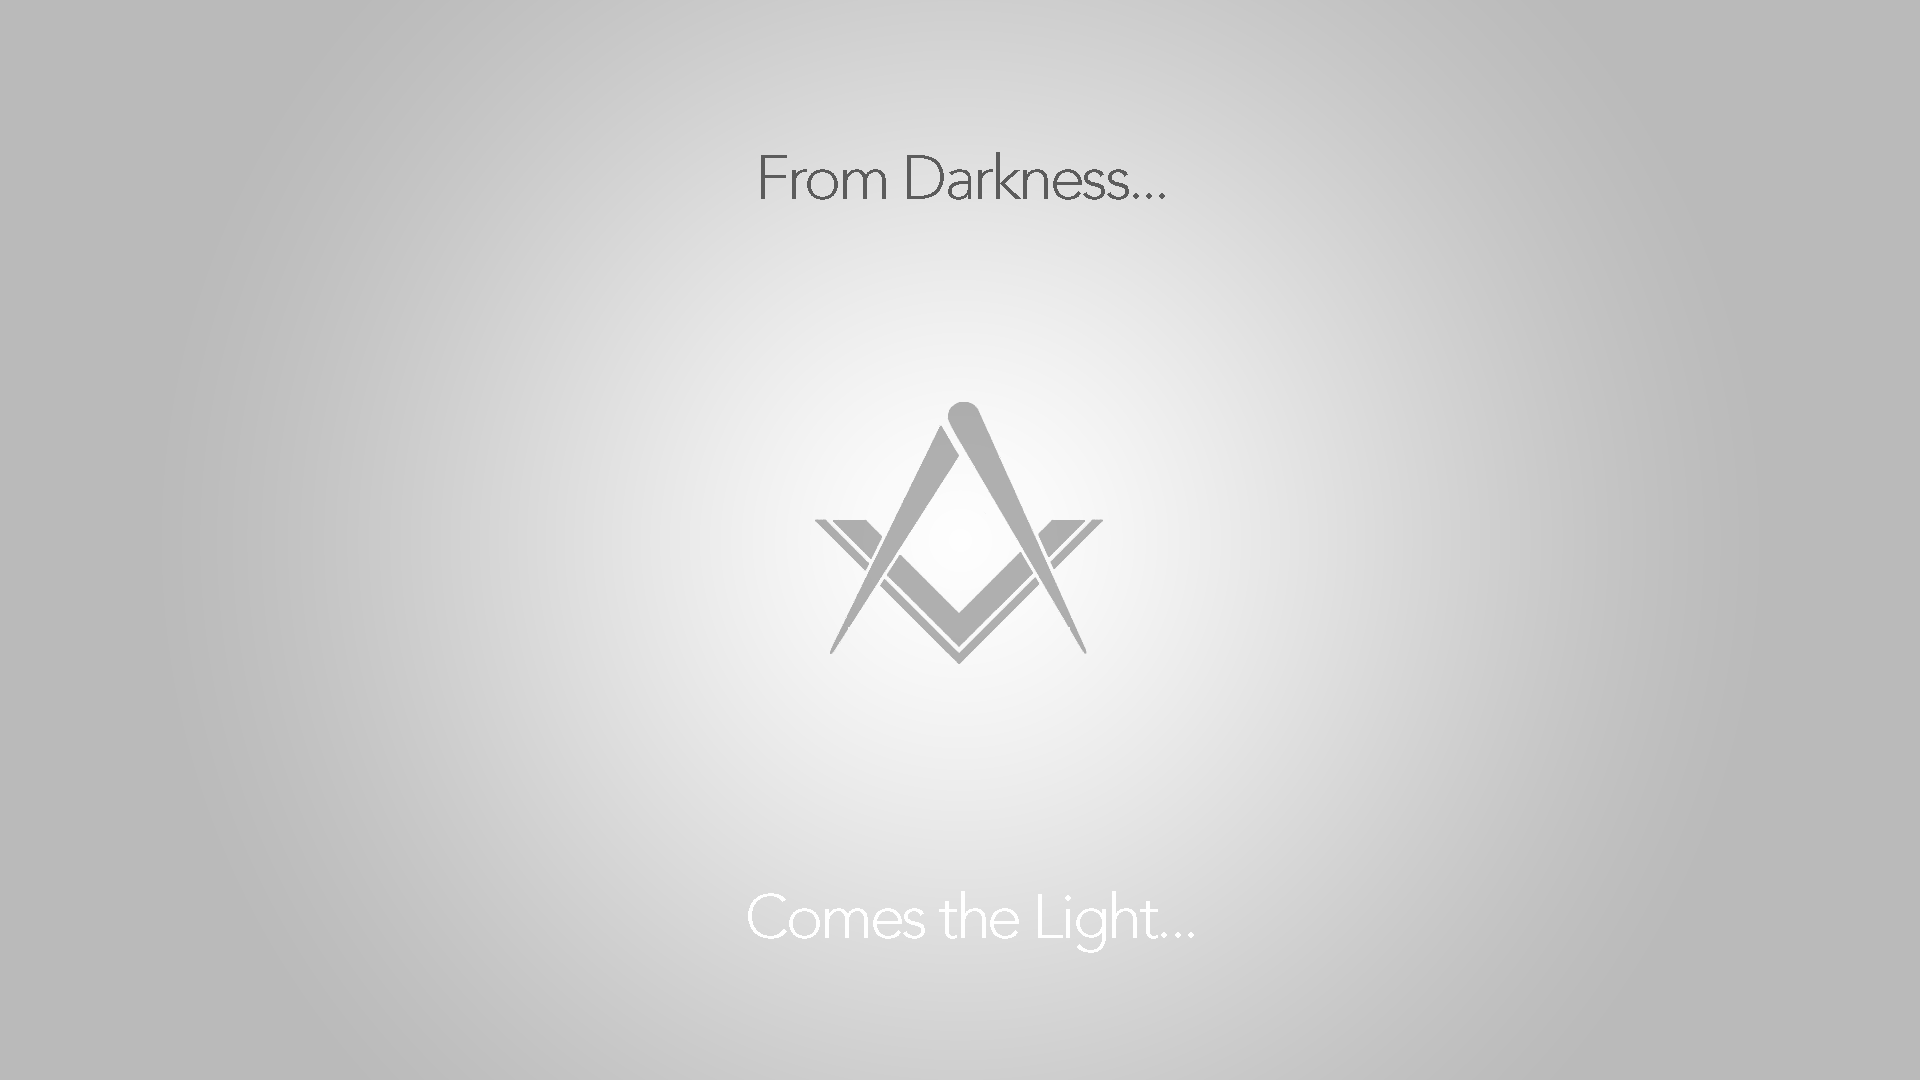 Another Wallpaper - From Darkness, Comes the Light.. : freemasonry